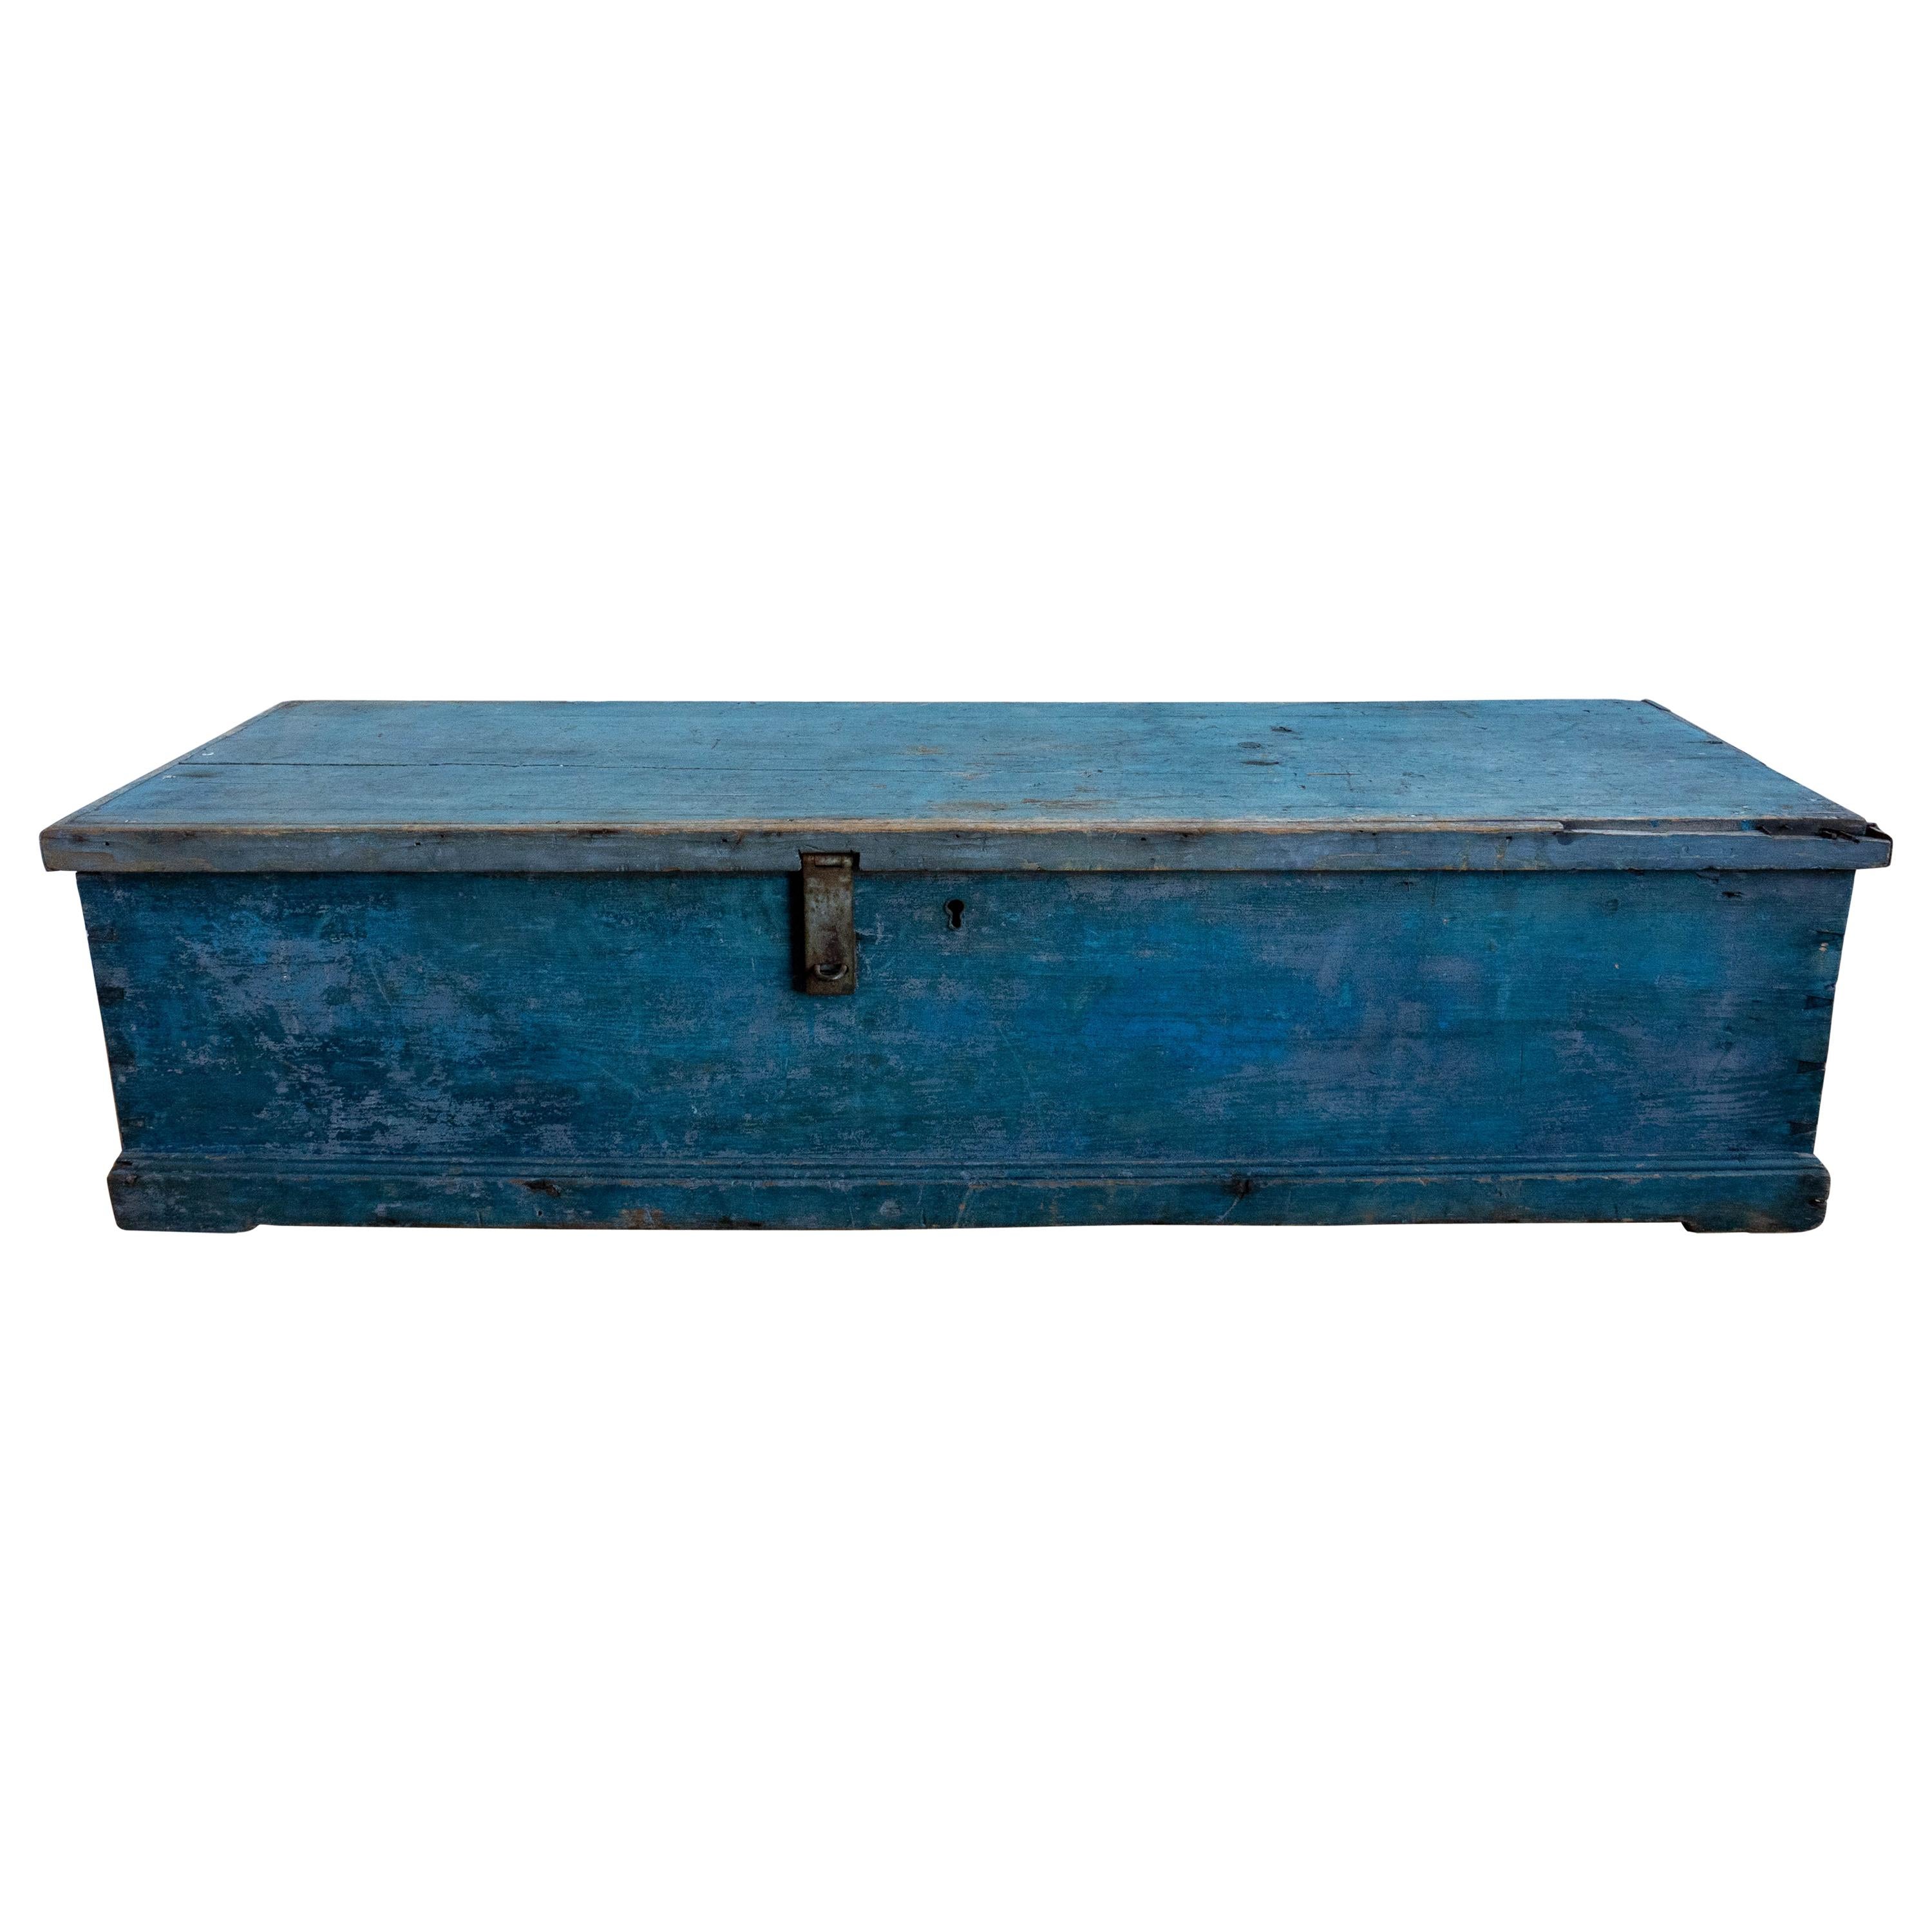 19th Century Long Sea Chest in Sky Blue Paint